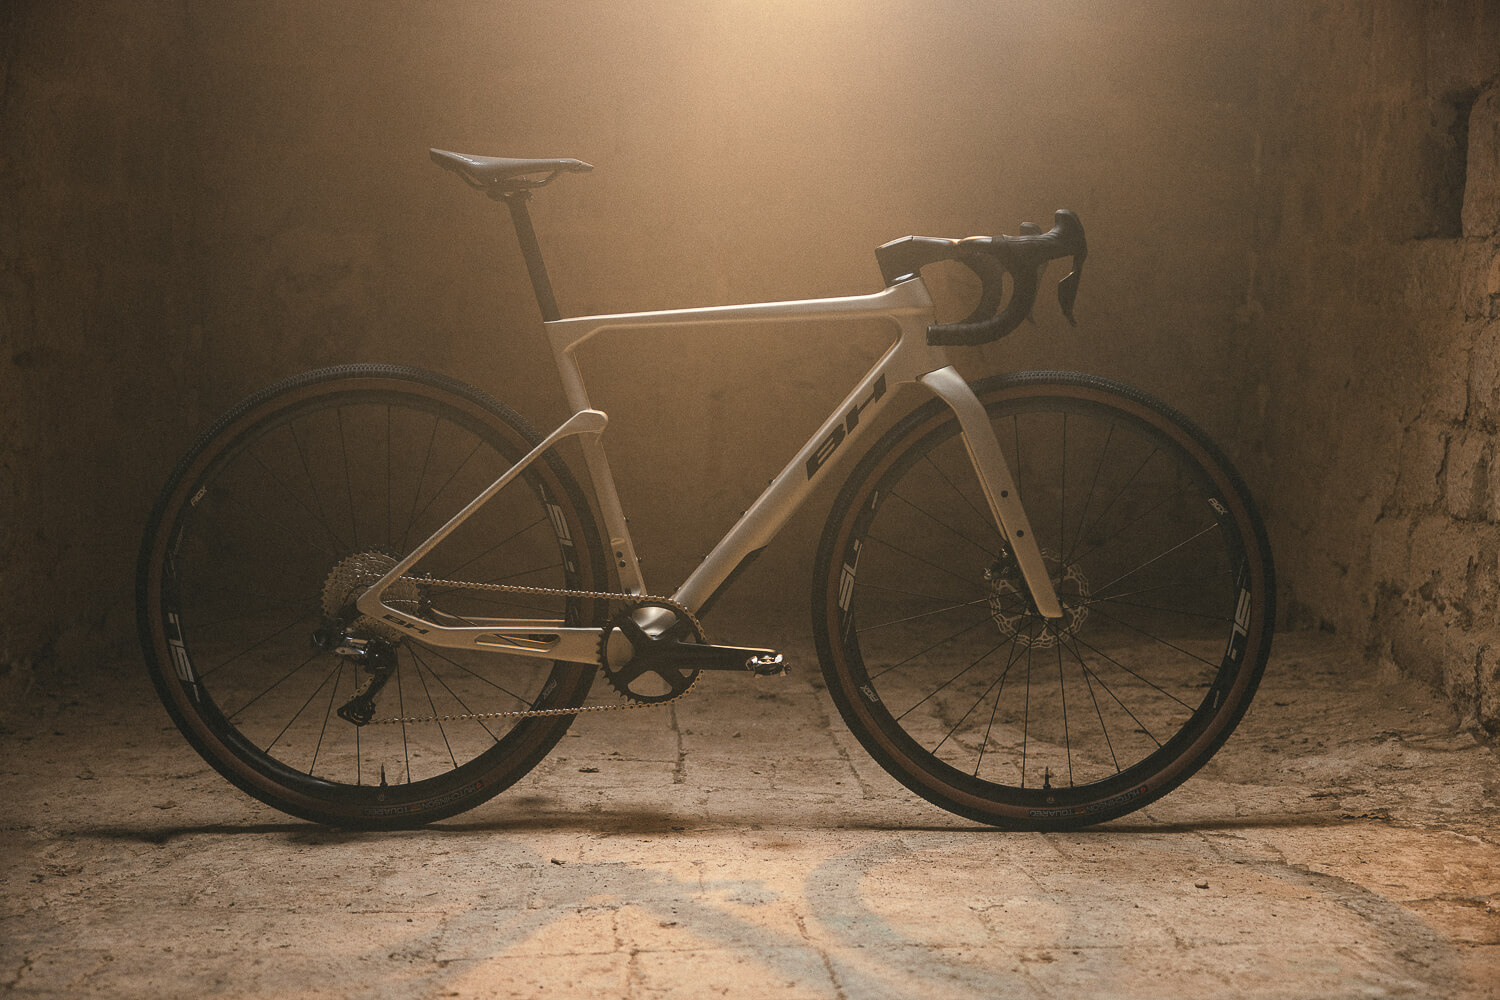 Industrial Design of a bike by Nacar